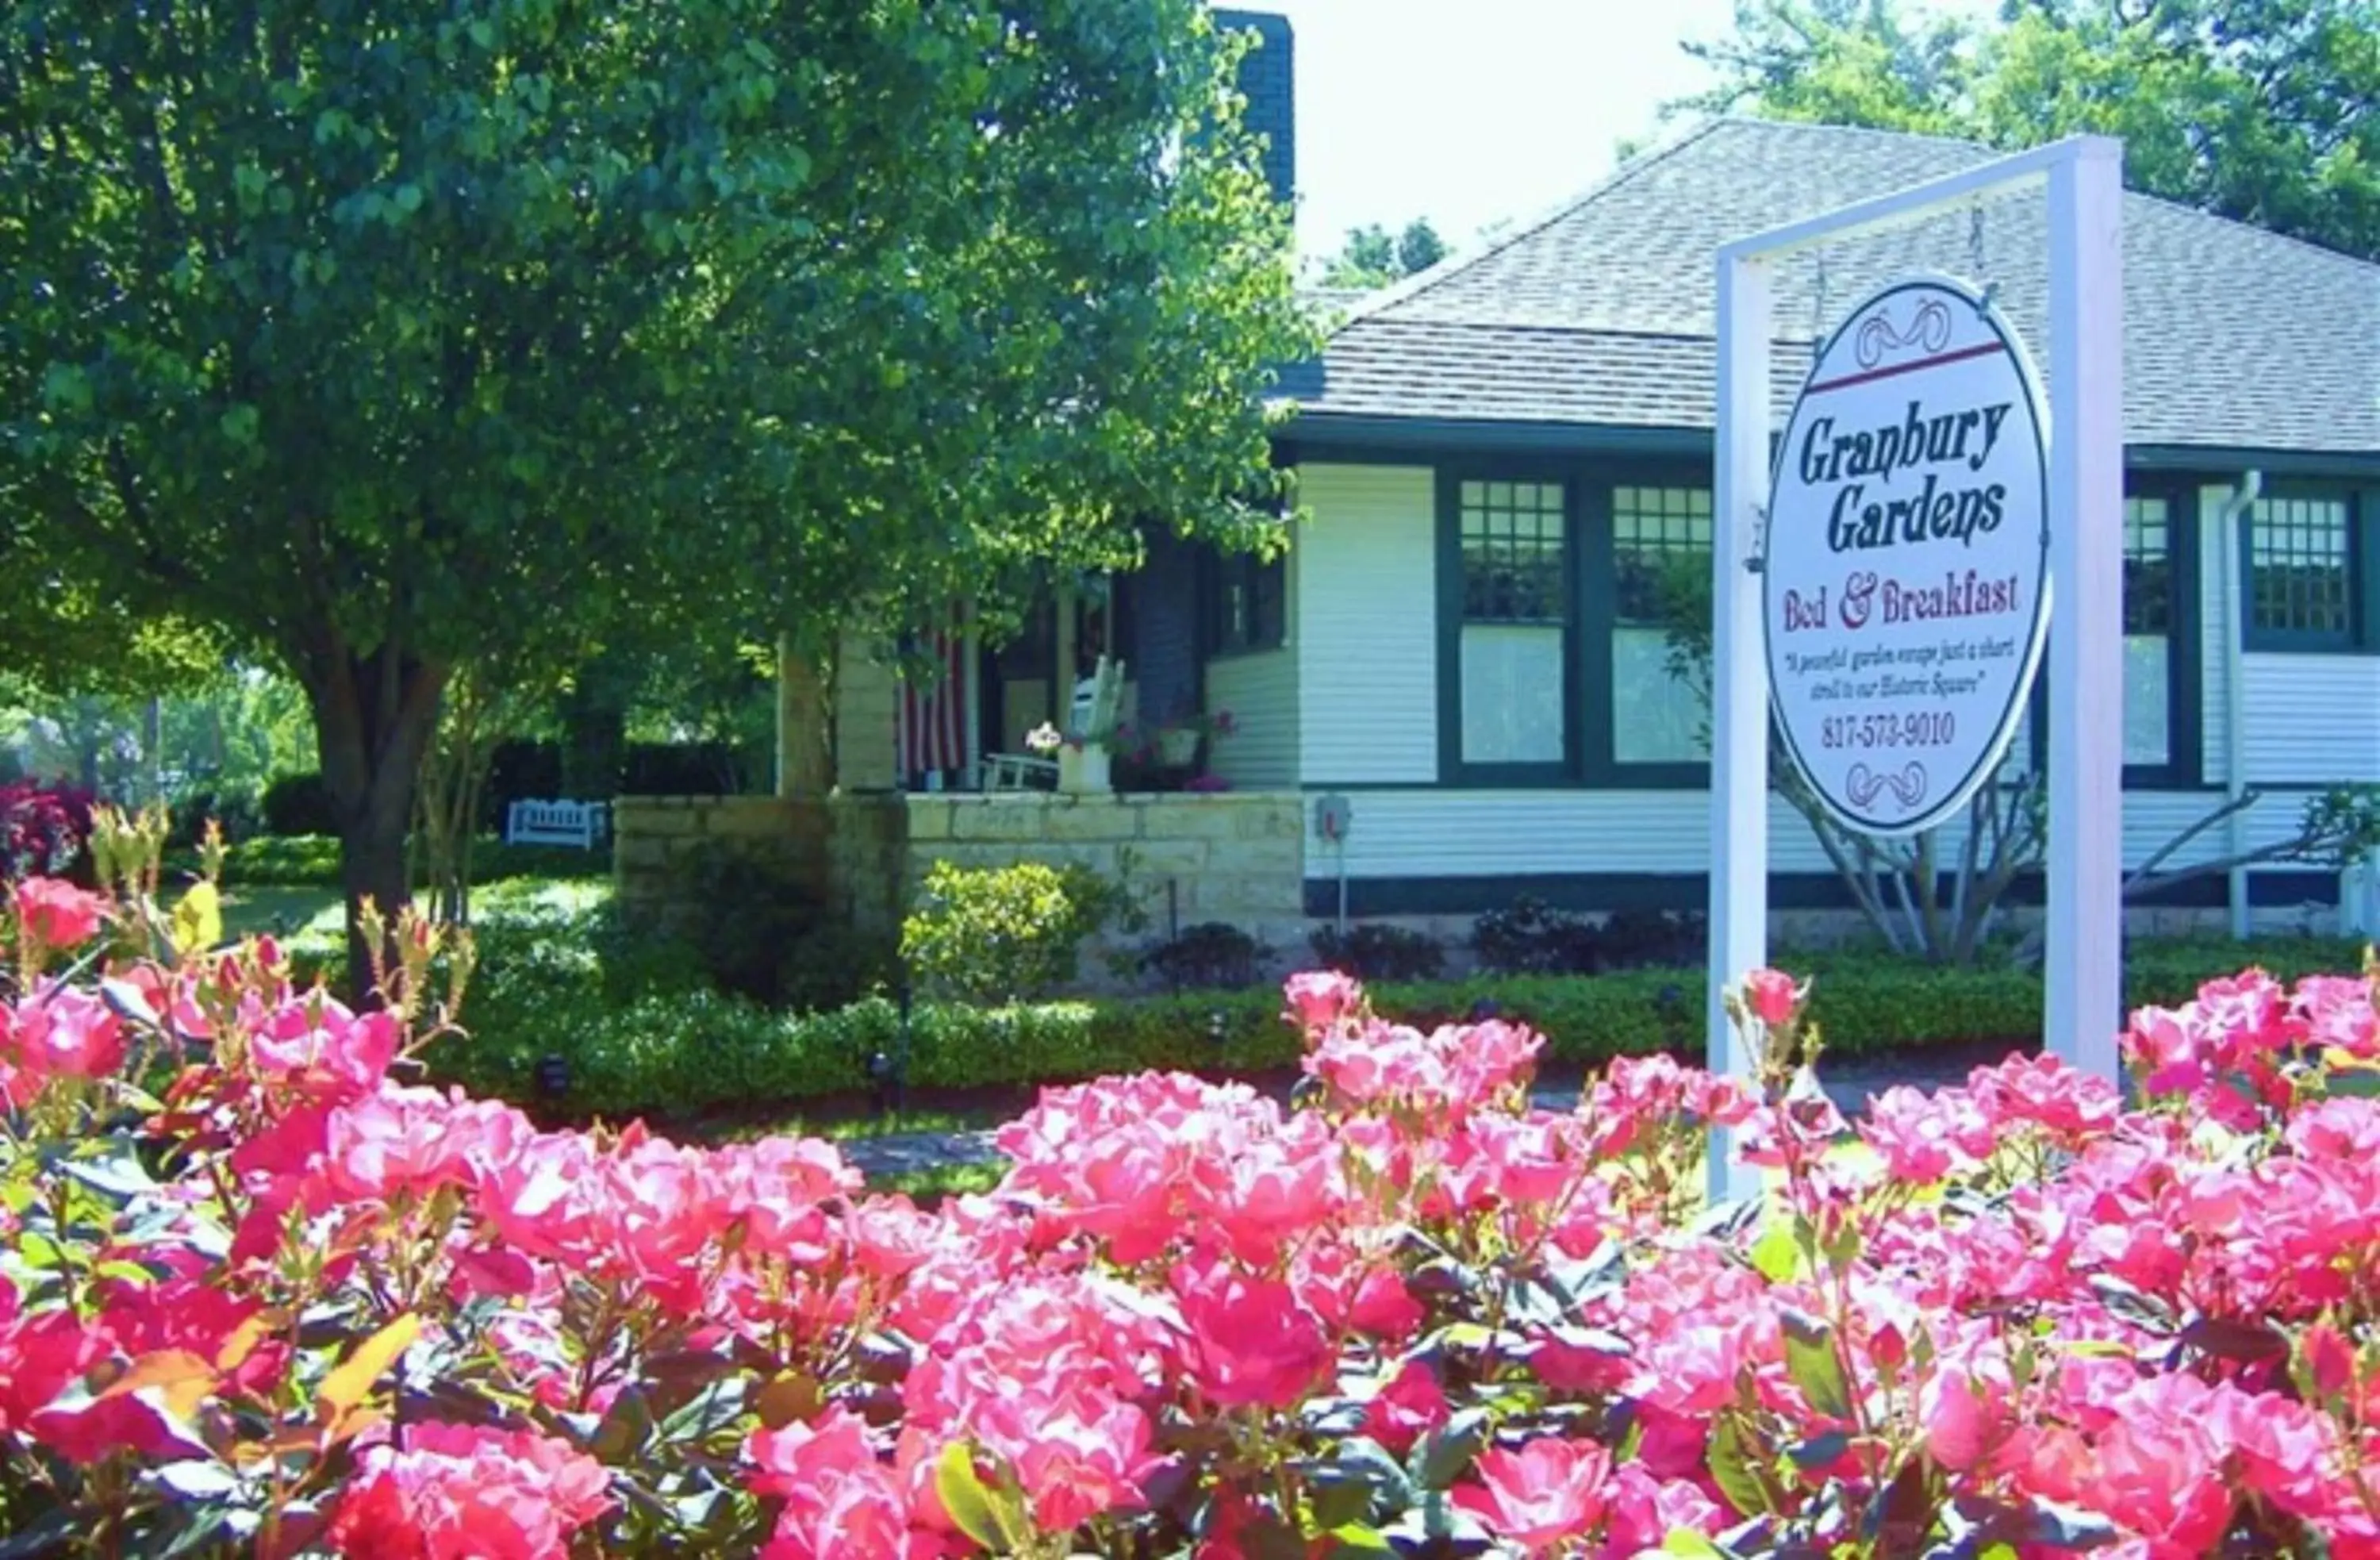 Property Building in Granbury Gardens Bed and Breakfast